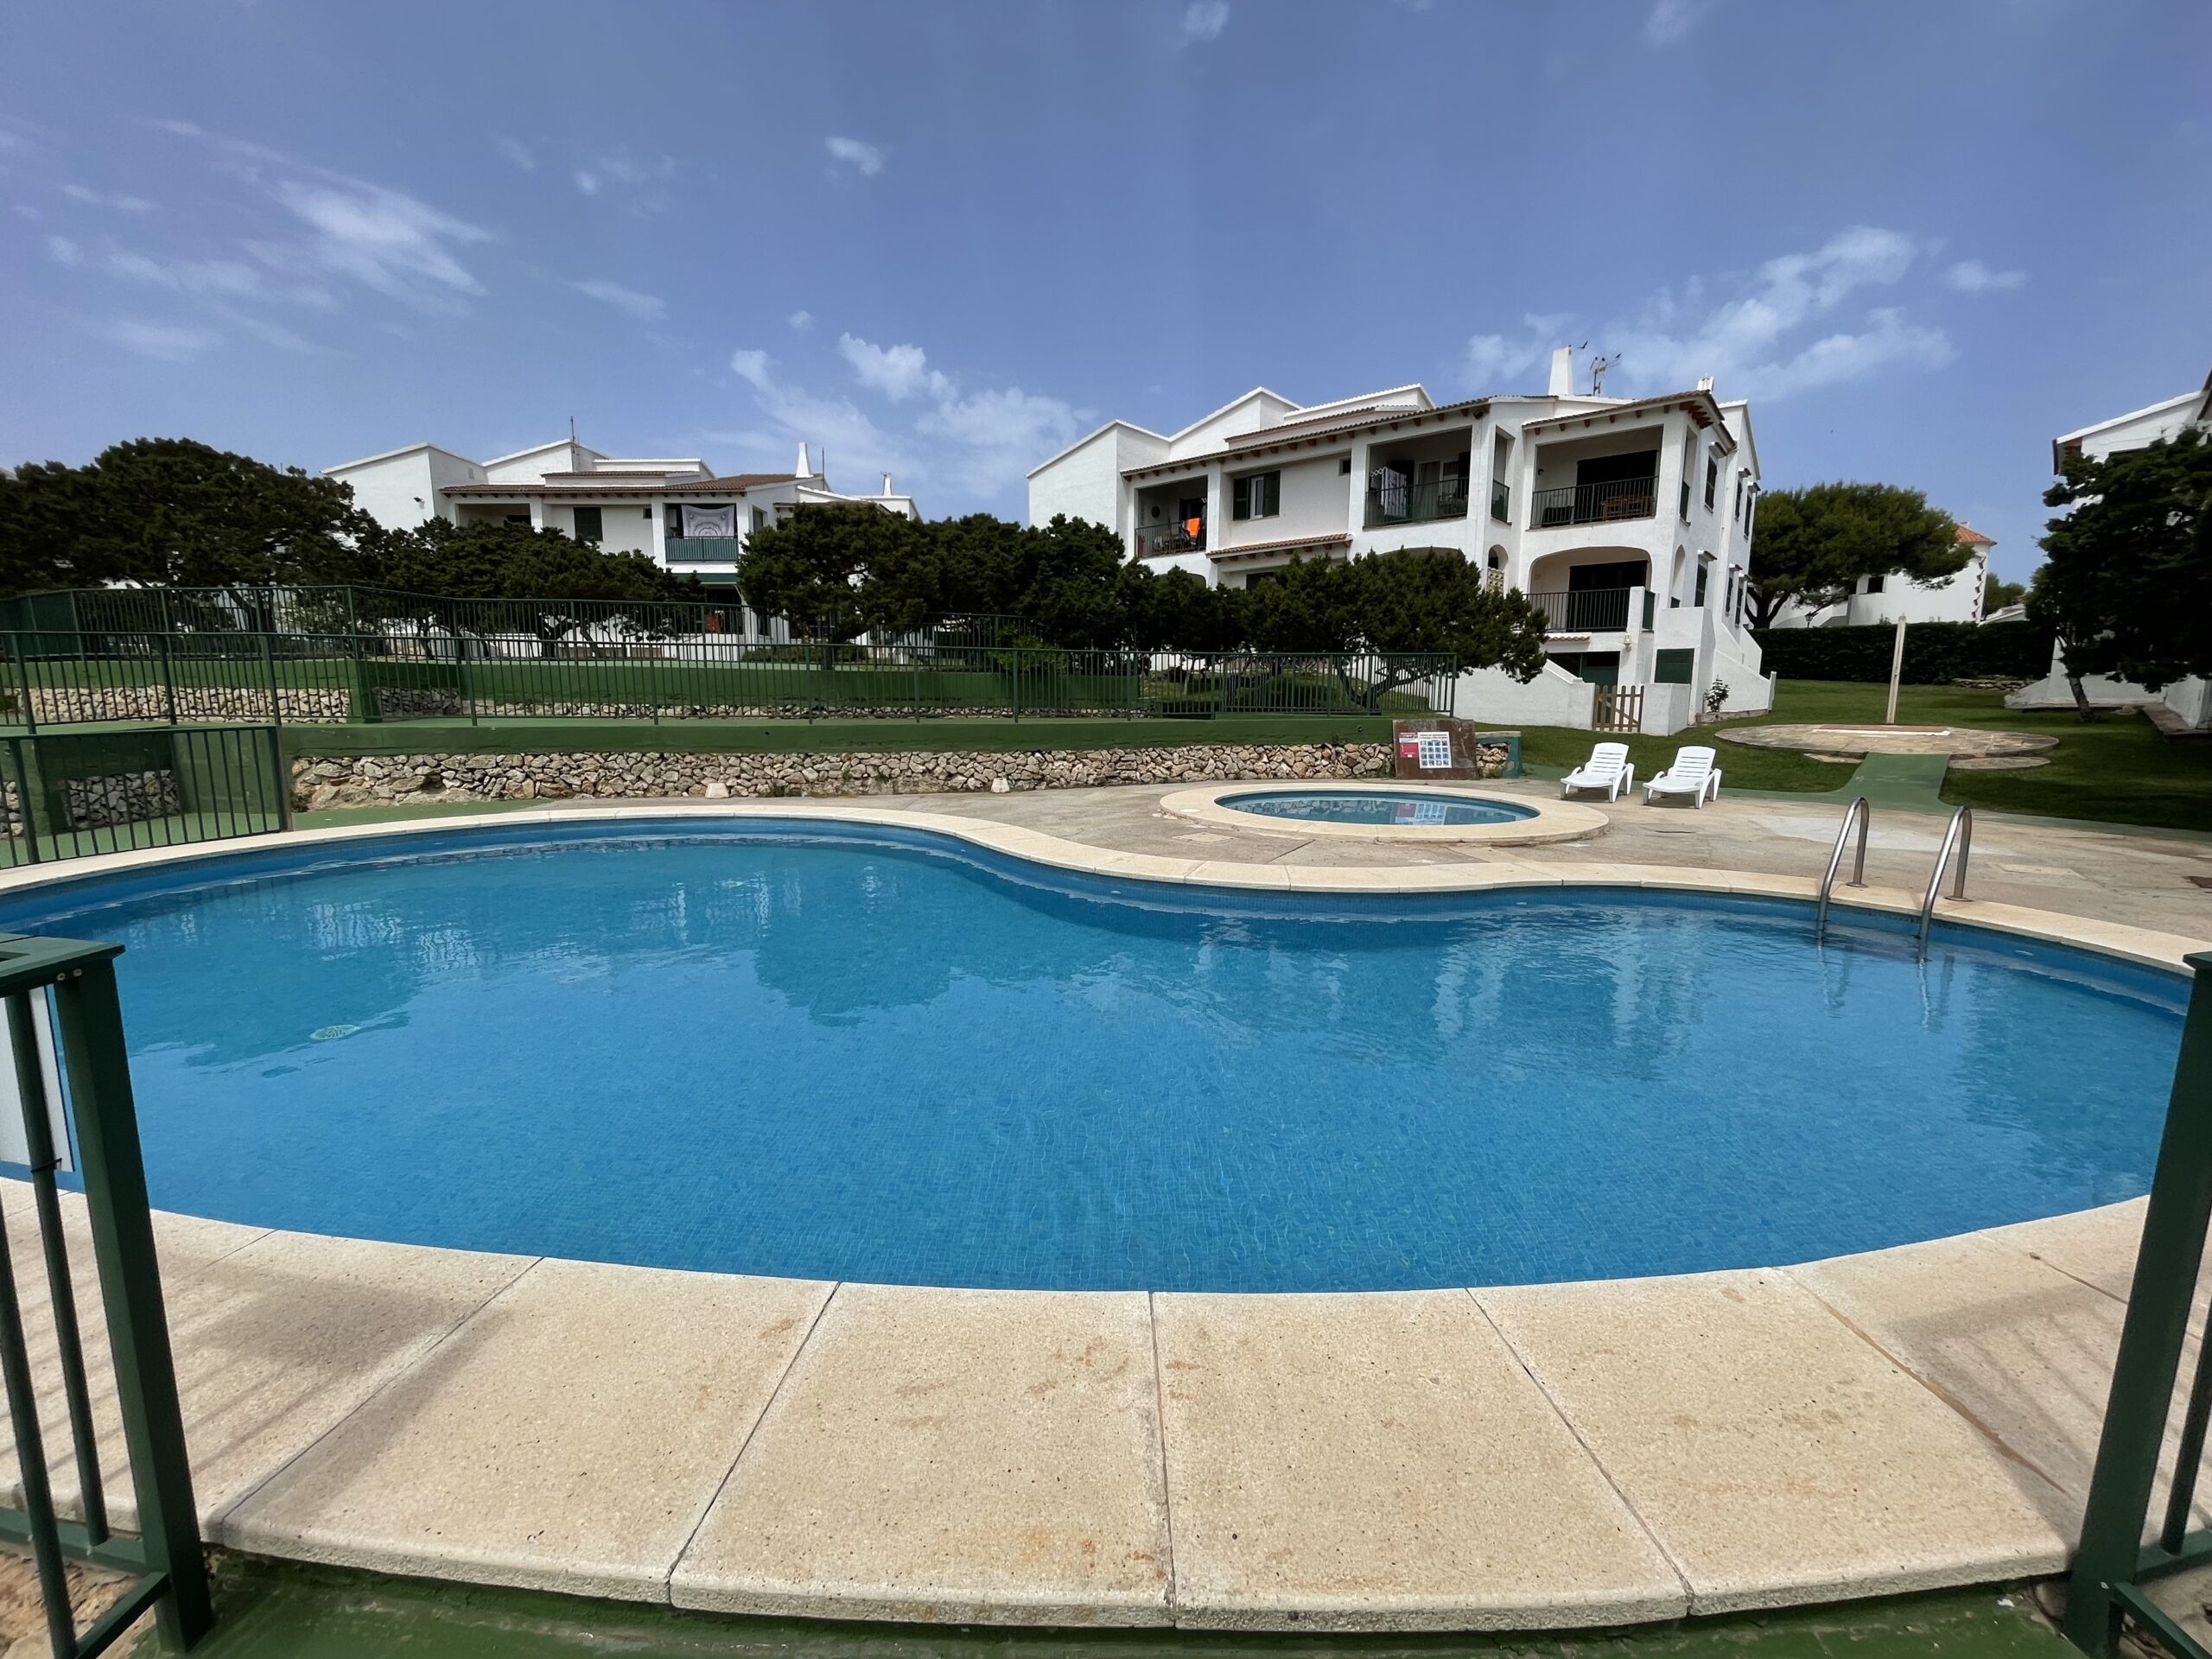 2-bedroom apartment with pool – BOSCH